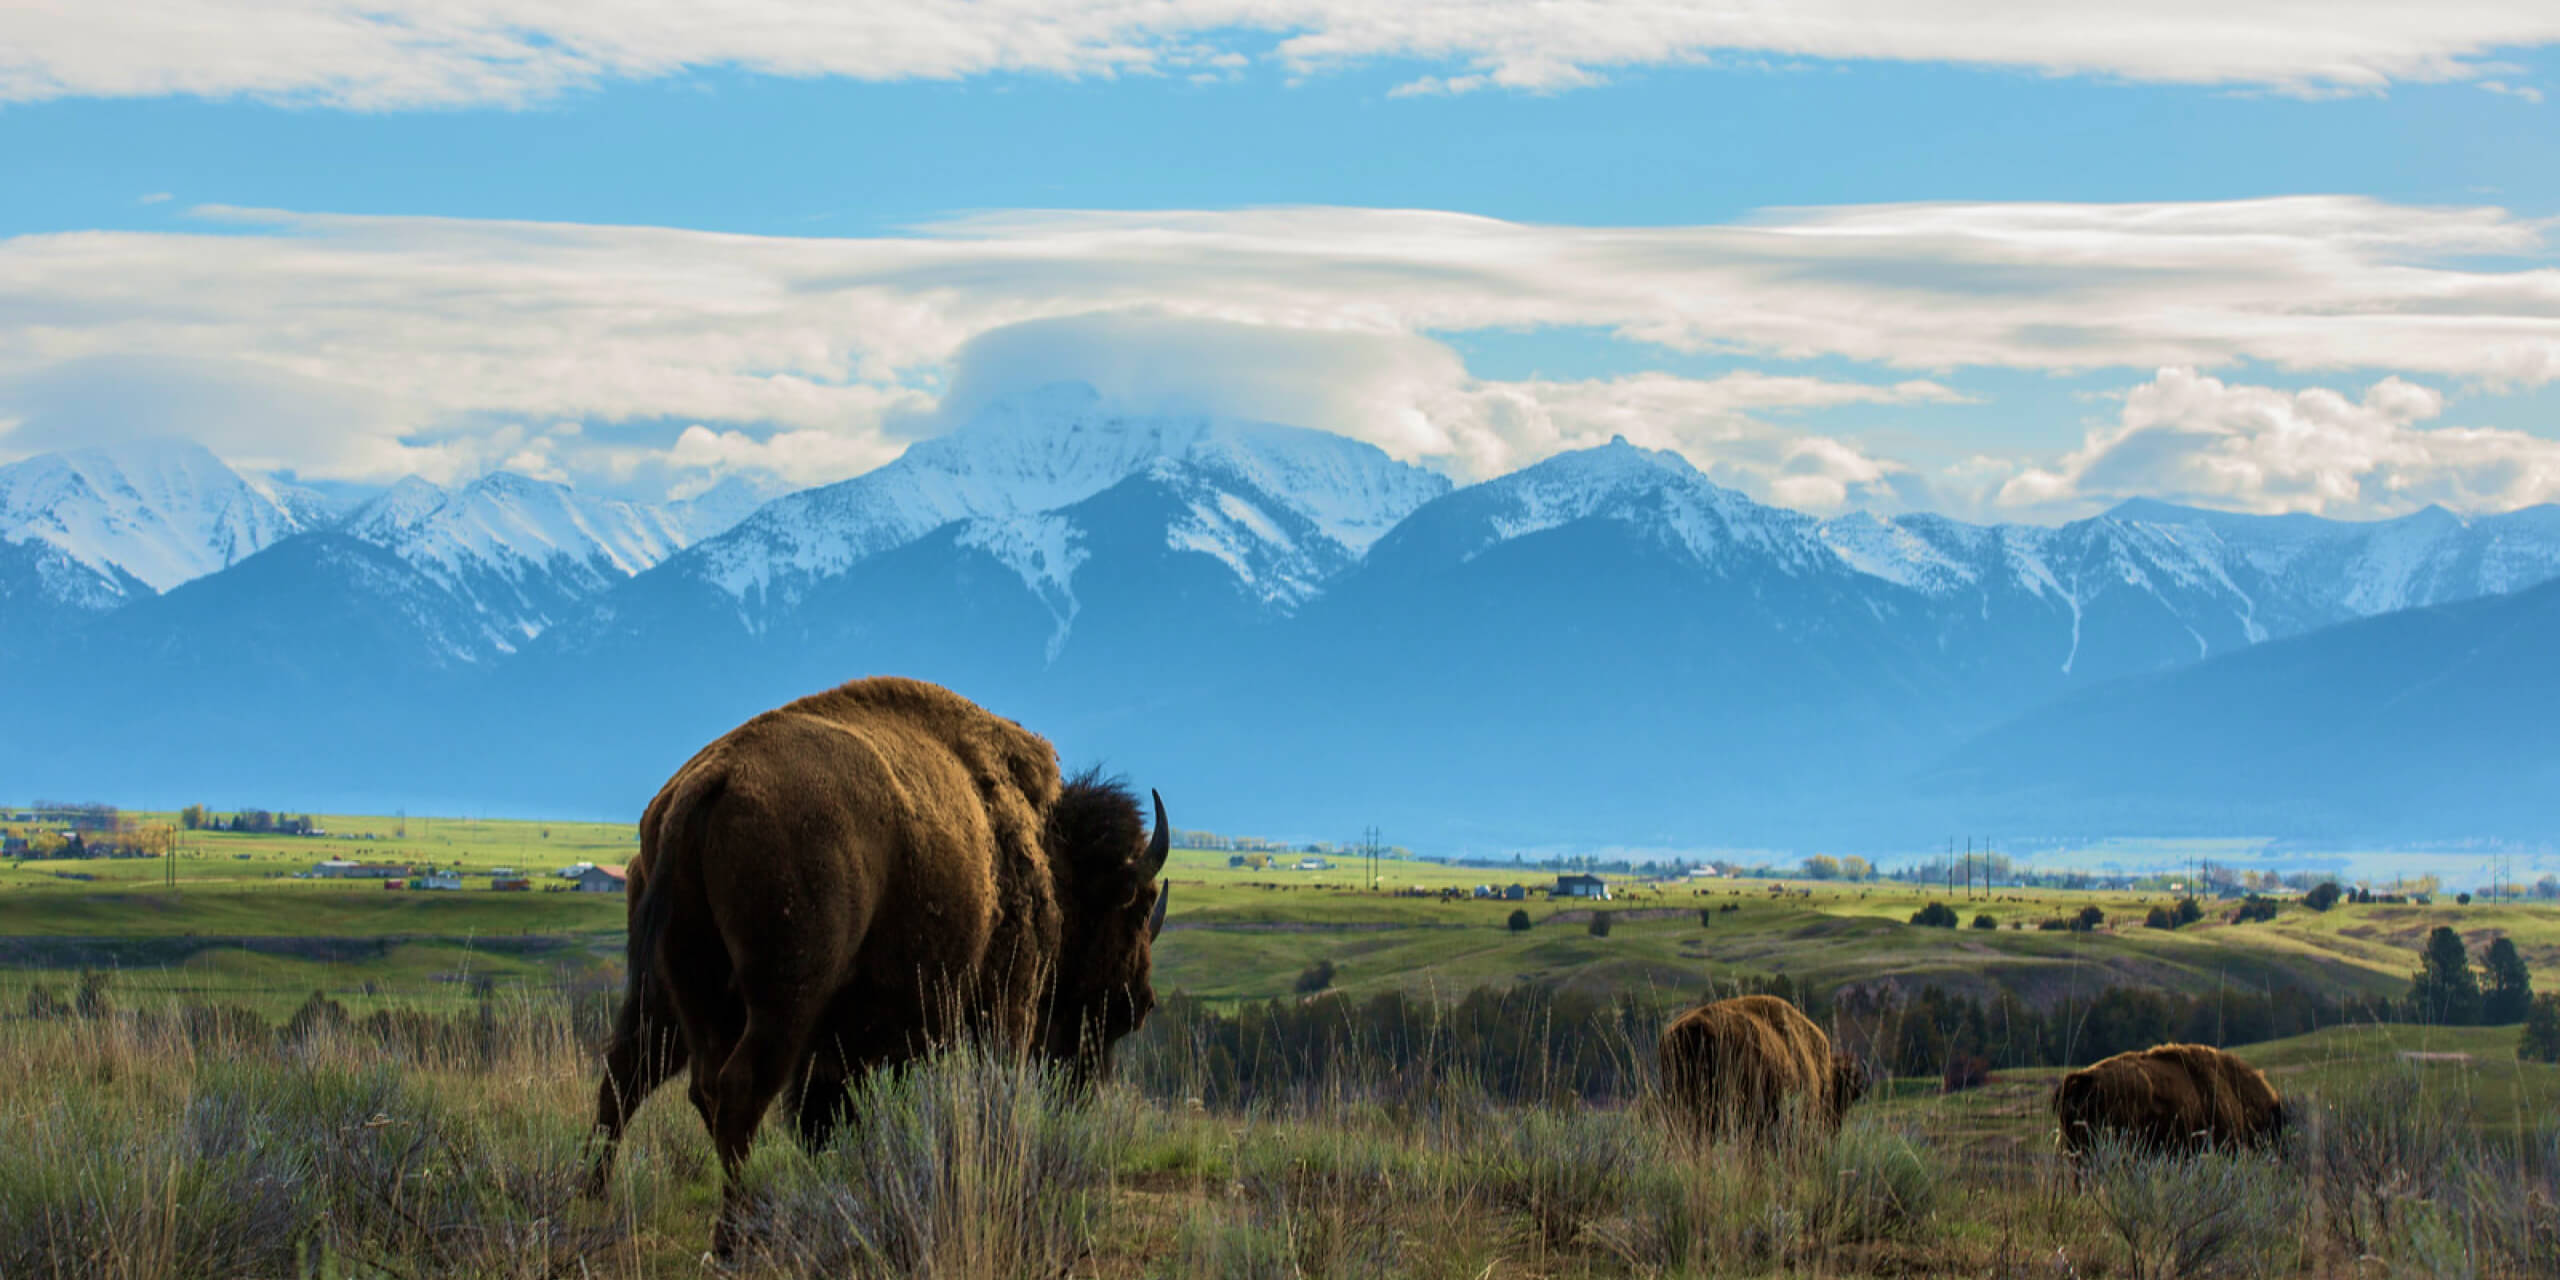 Several large brown buffaloes roaming in a vast green field with white snowcapped mountains in the background